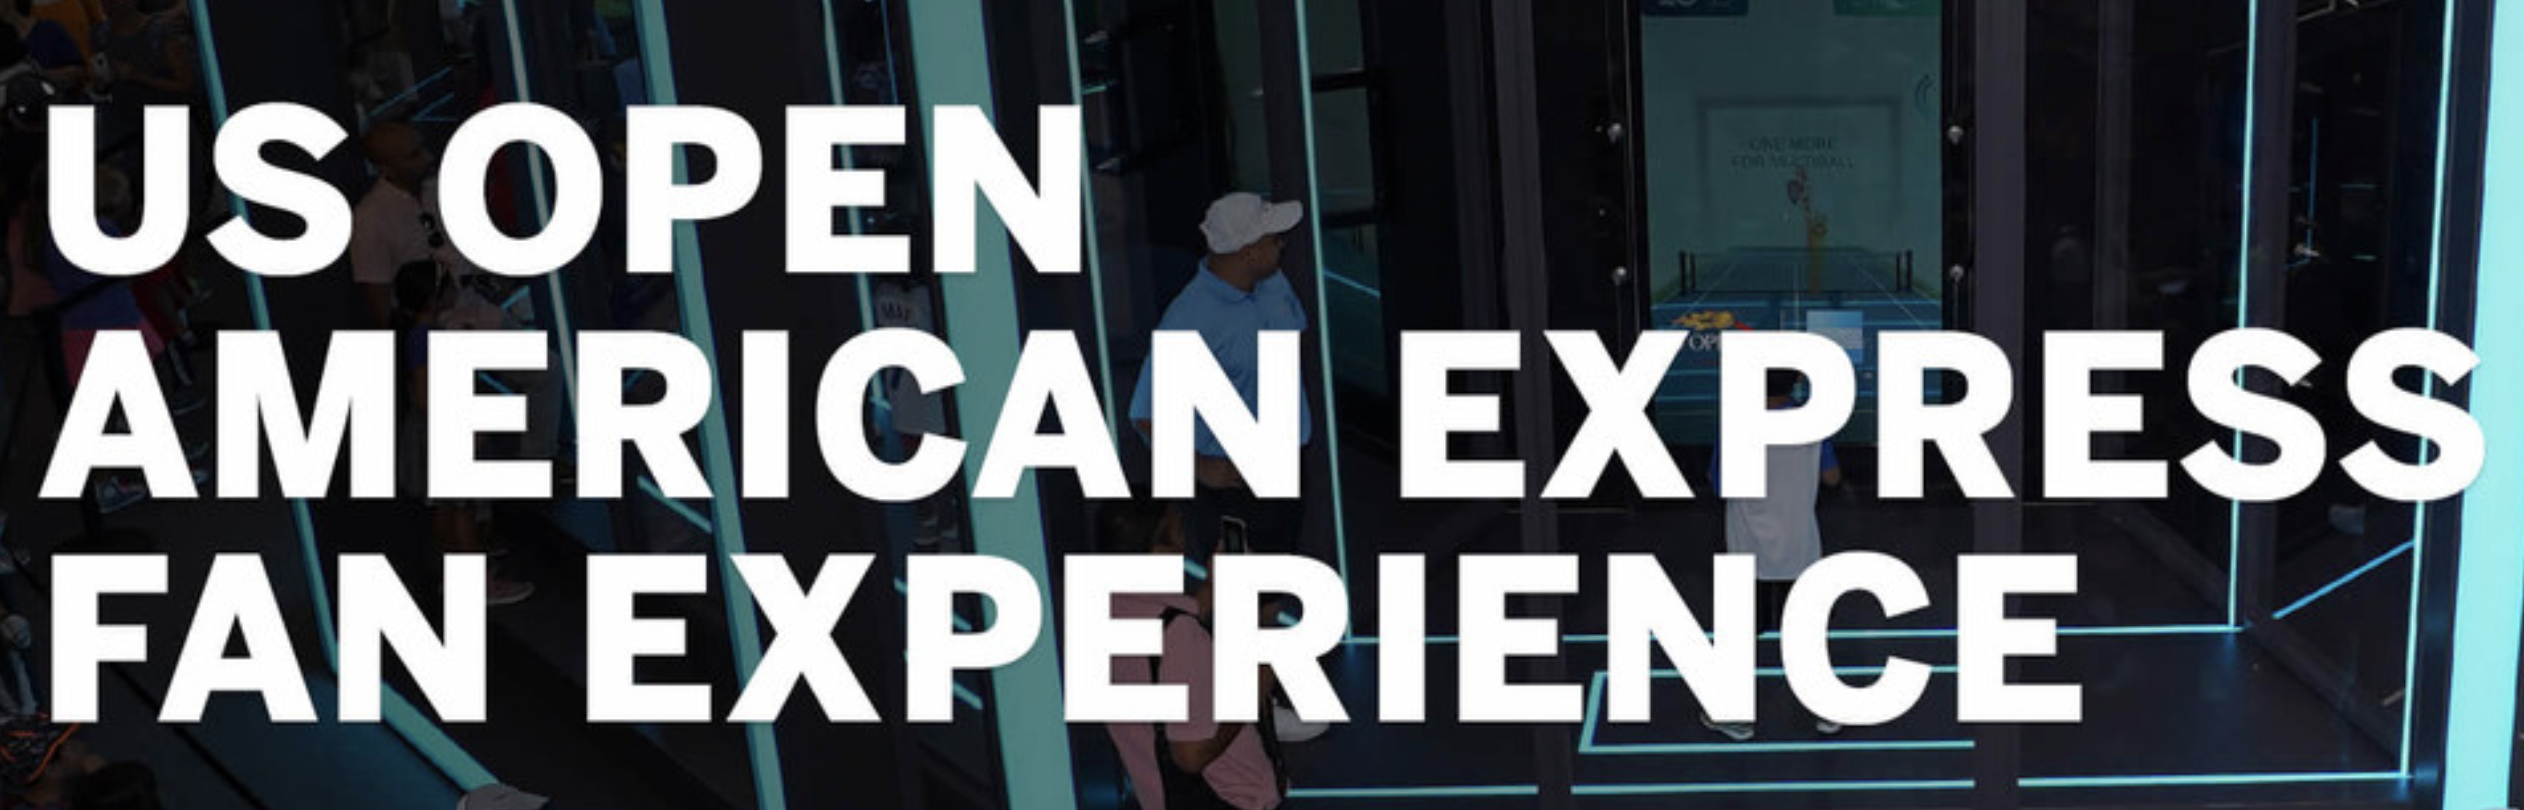 American Express Platinum Card Offers Unique US Open Benefits